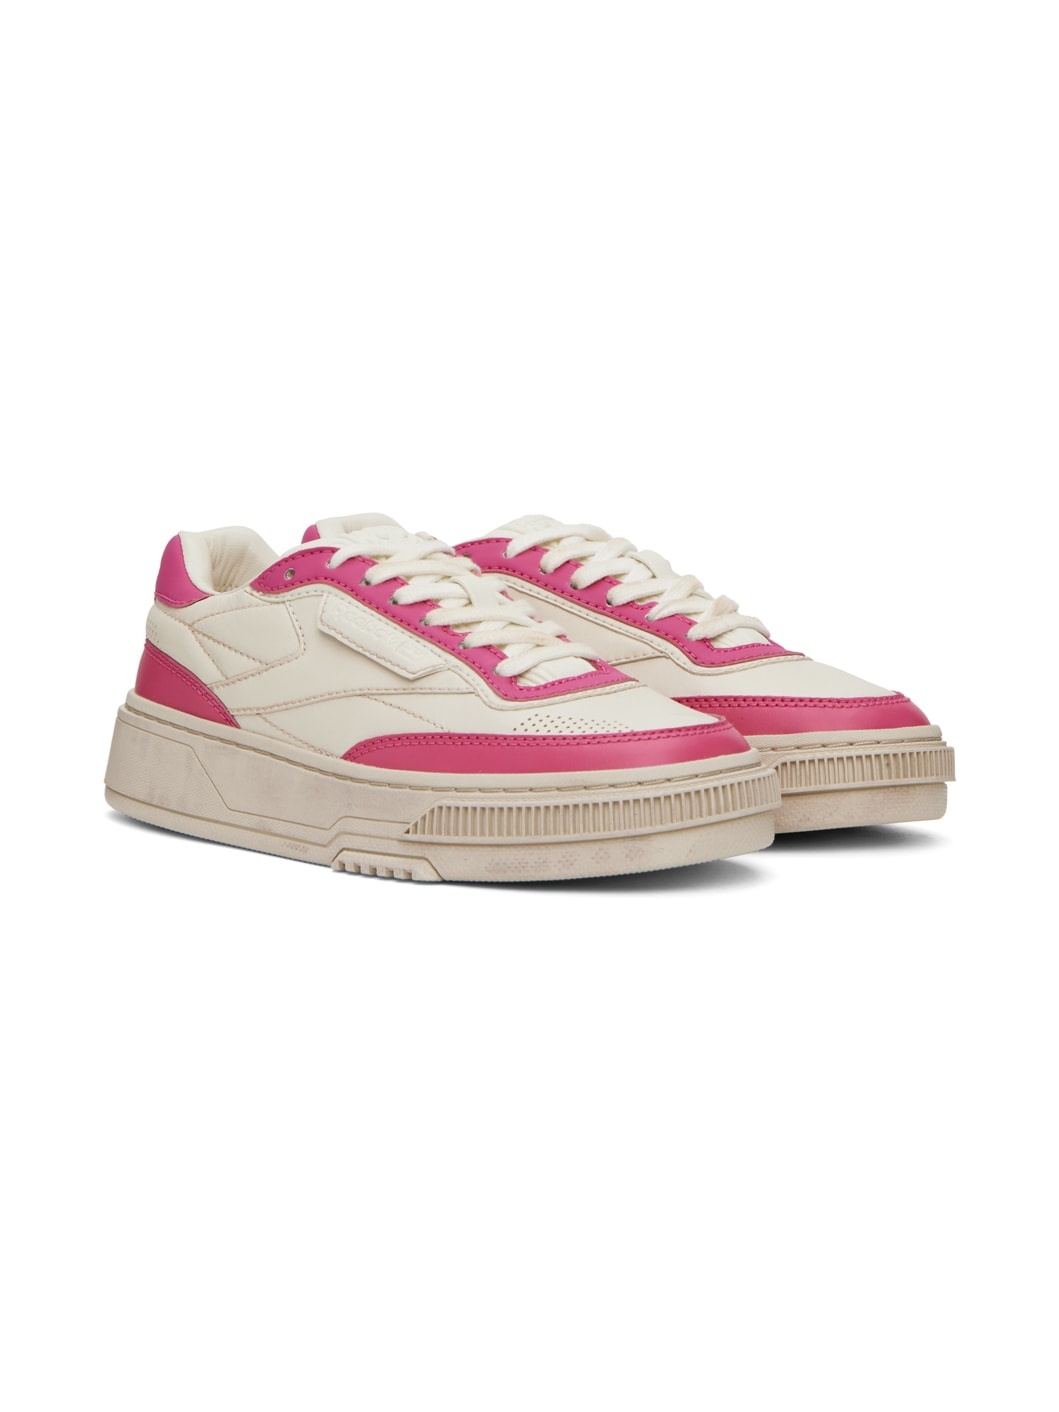 Off-White & Pink Club C LTD Sneakers - 4